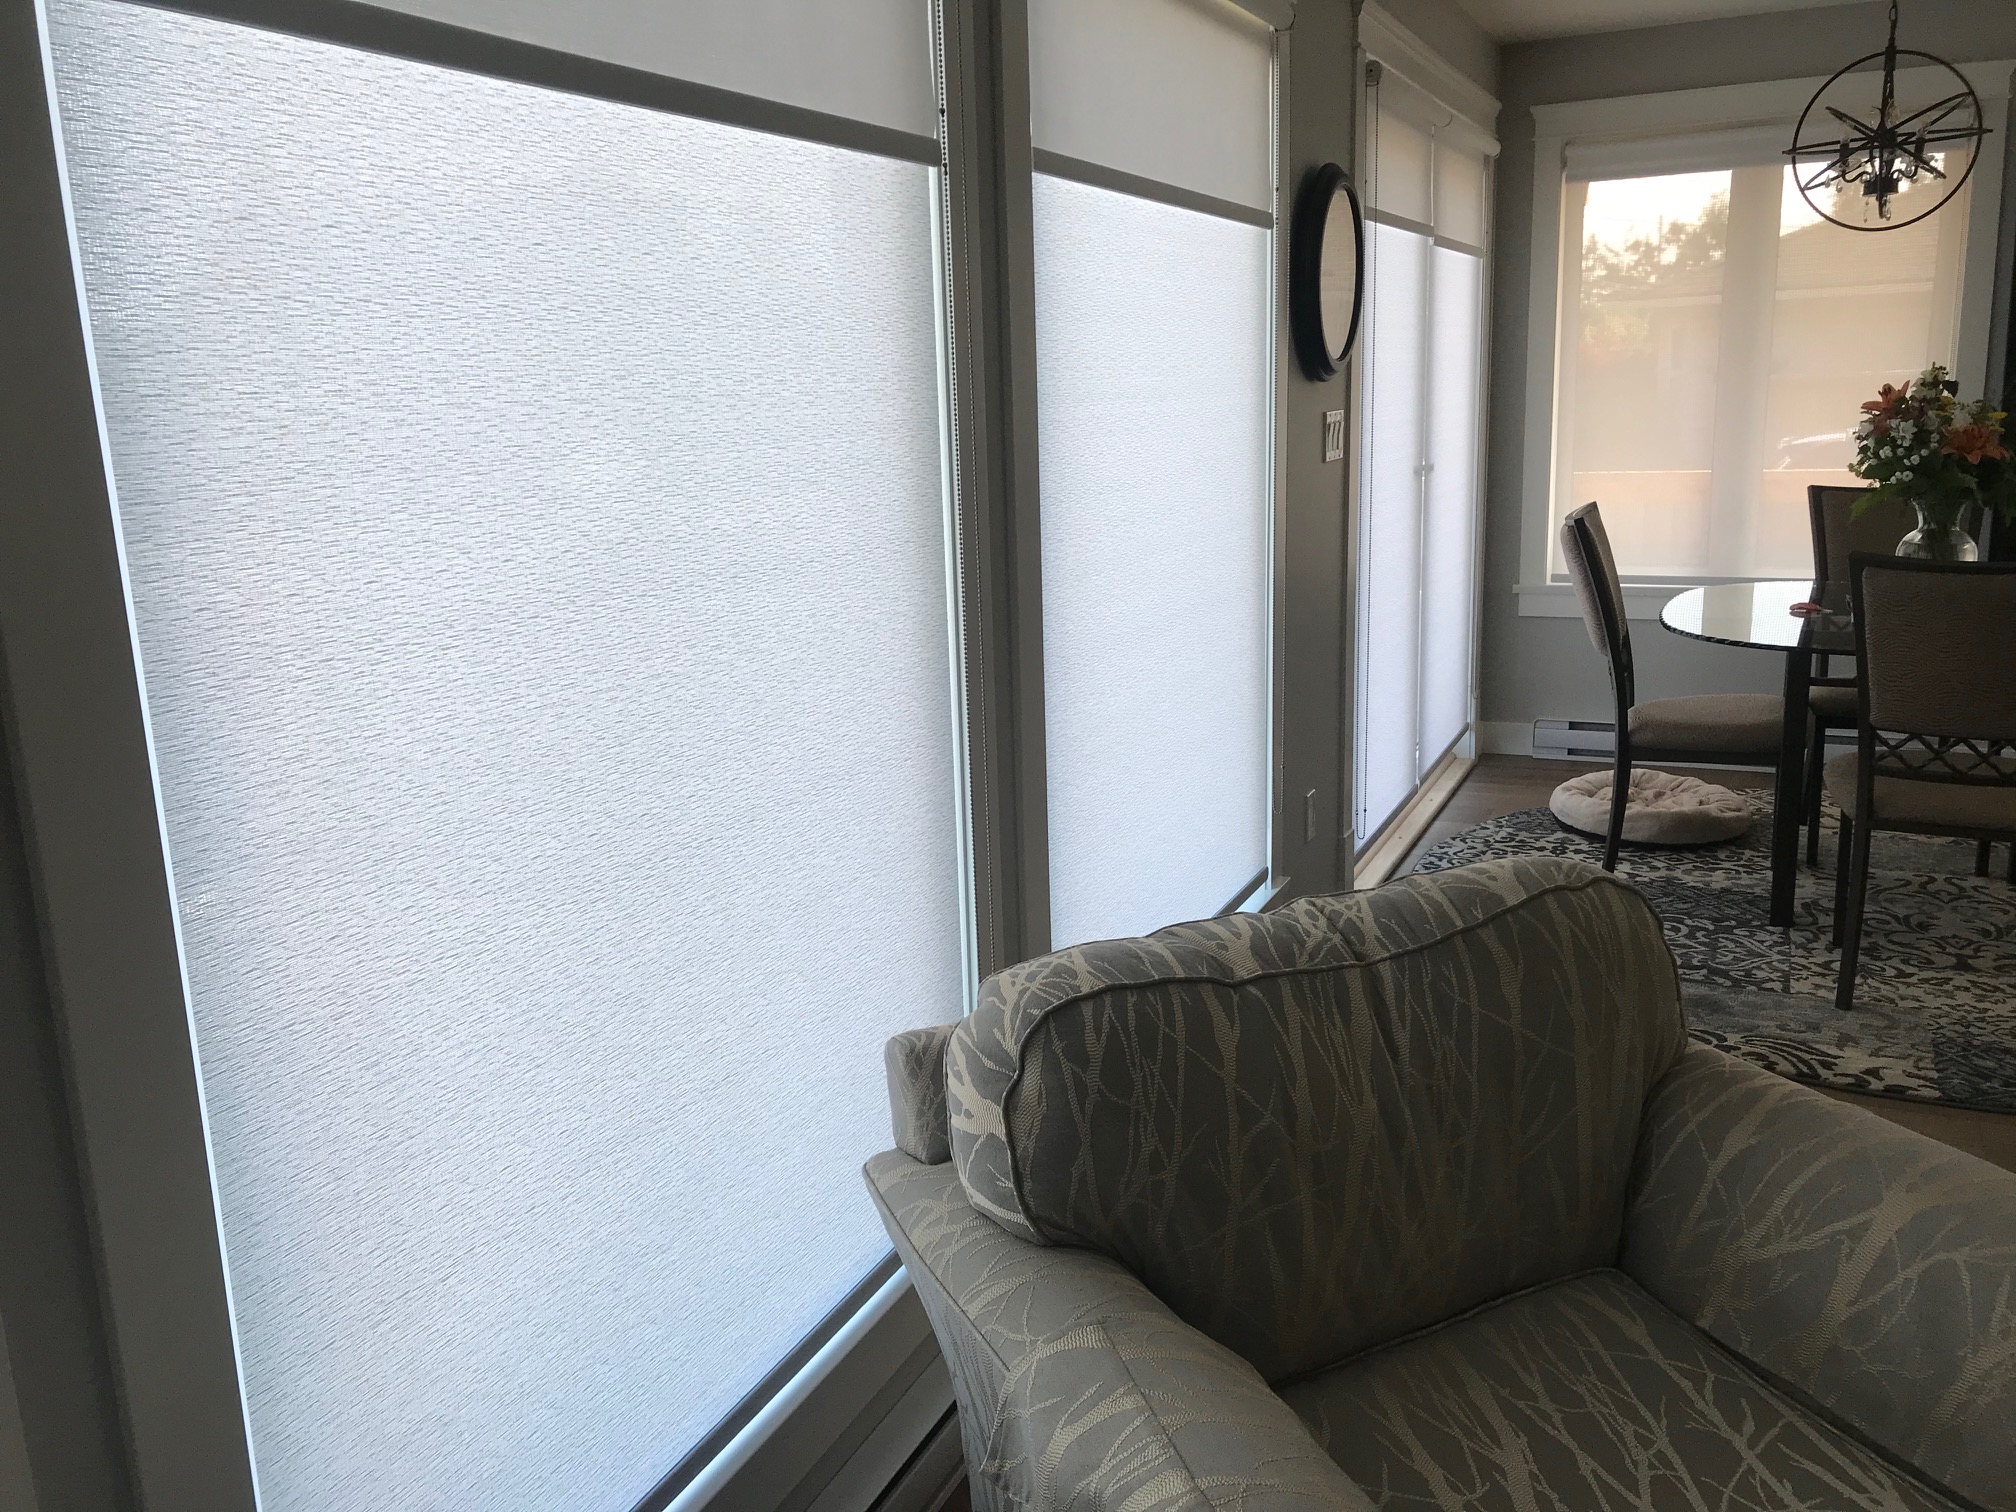 Dual Roller Shades for added layers of privacy and light control Budget Blinds of Comox Valley and Campbell River Courtenay (250)338-8564